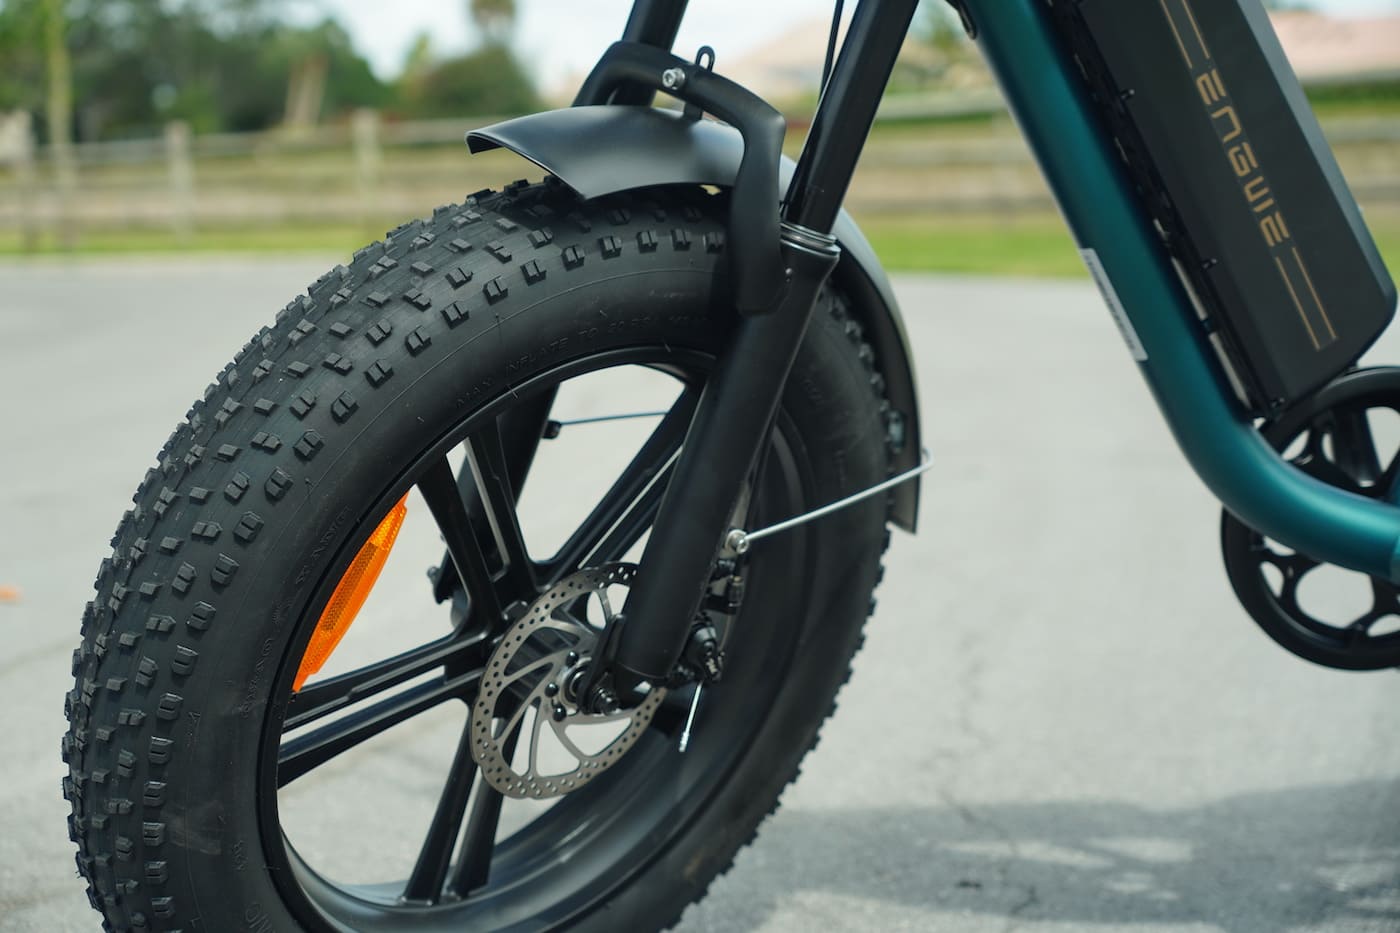 Engwe M20 launched as low-cost, full-suspension fast e-moped